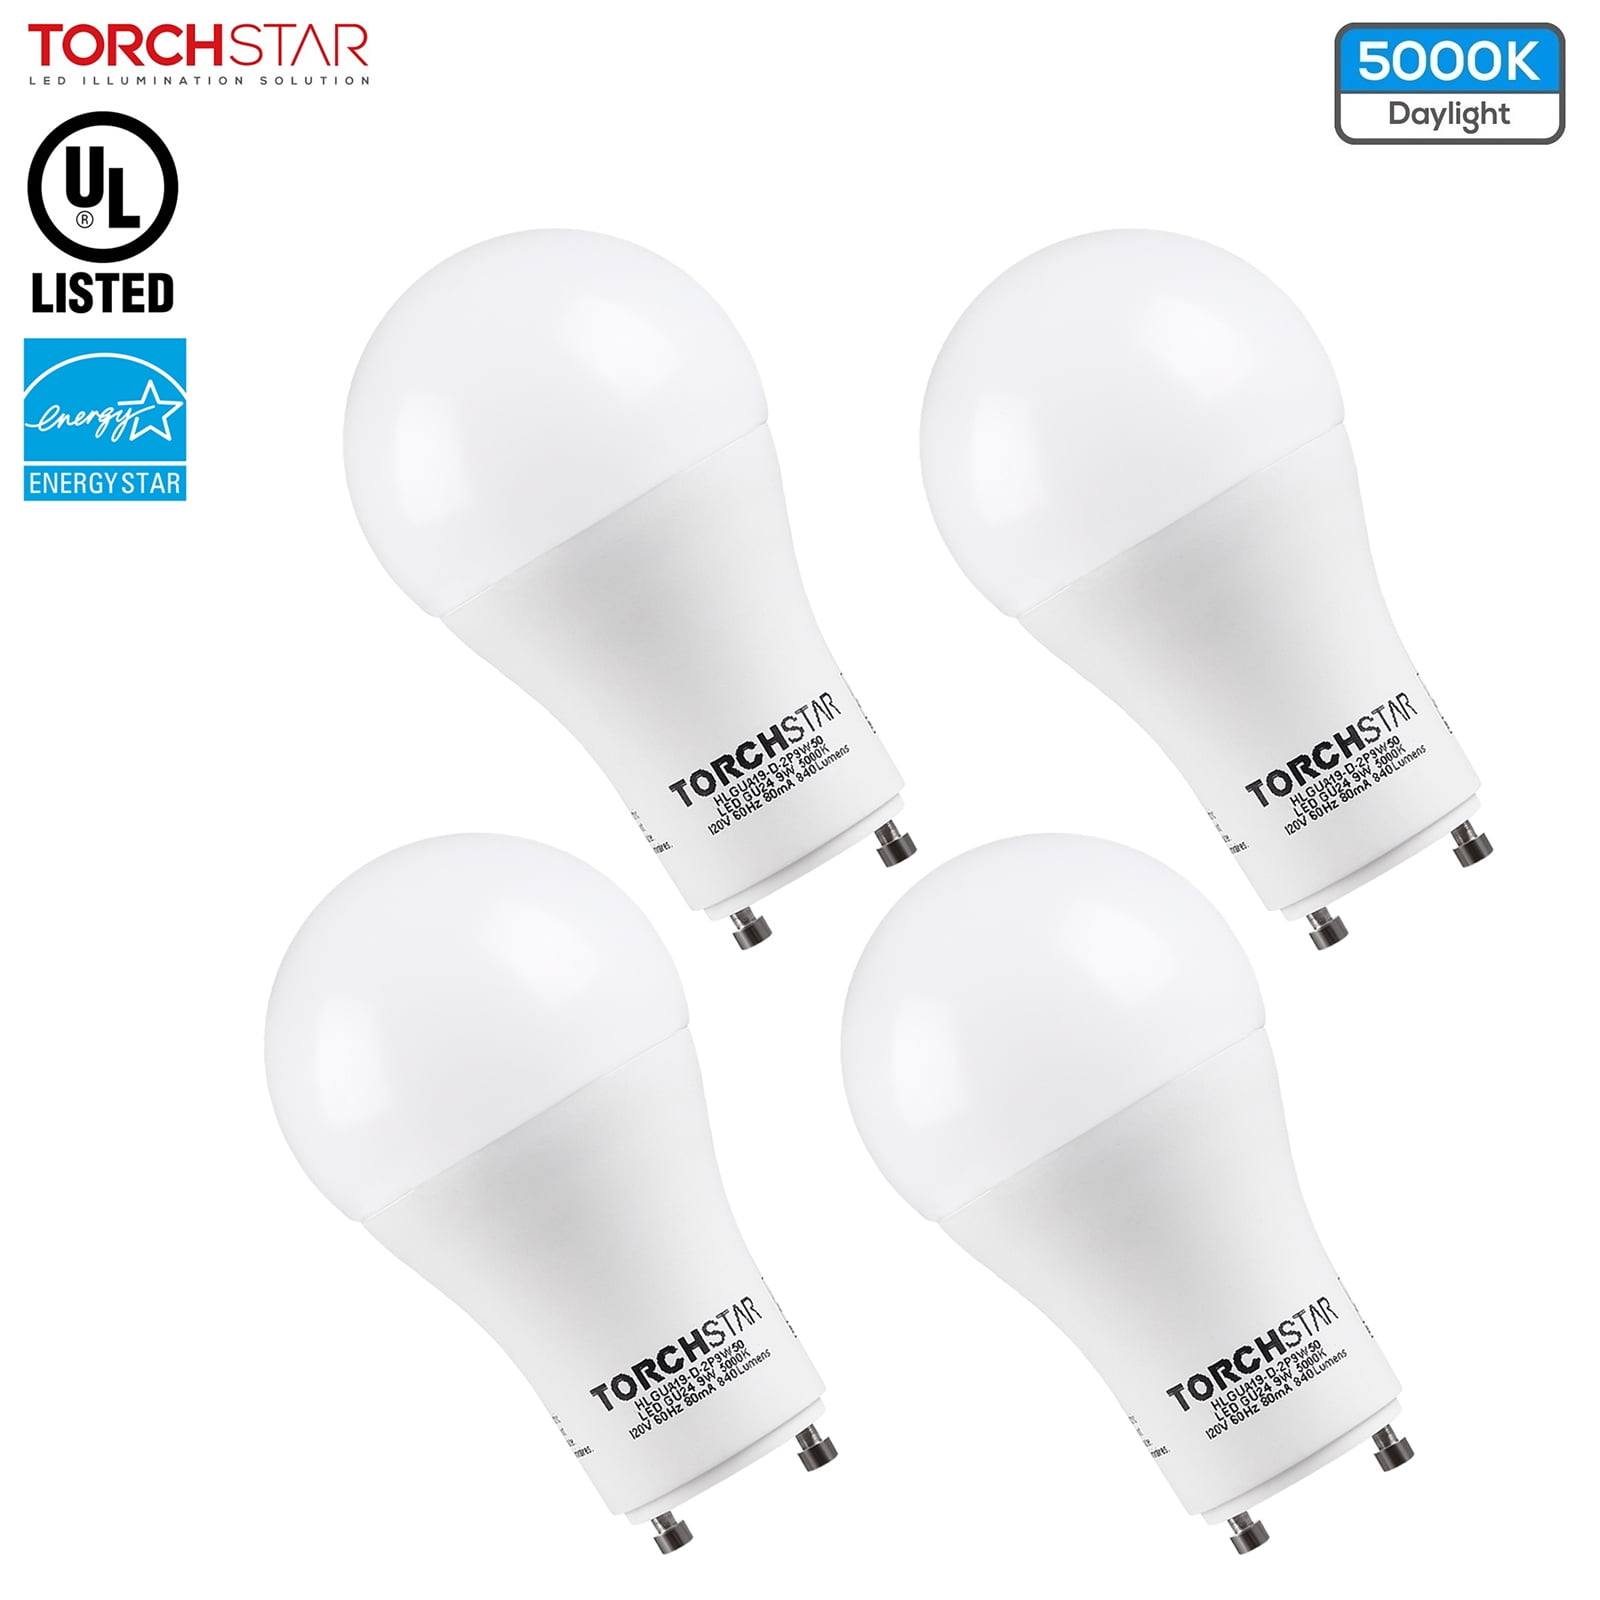 750 Lumens Twist-in Light Bulb 4-Pack A19 Shape 9W Dimmable 5000K Daylight UL Listed Great Eagle LED GU24 Base 60W Equivalent 